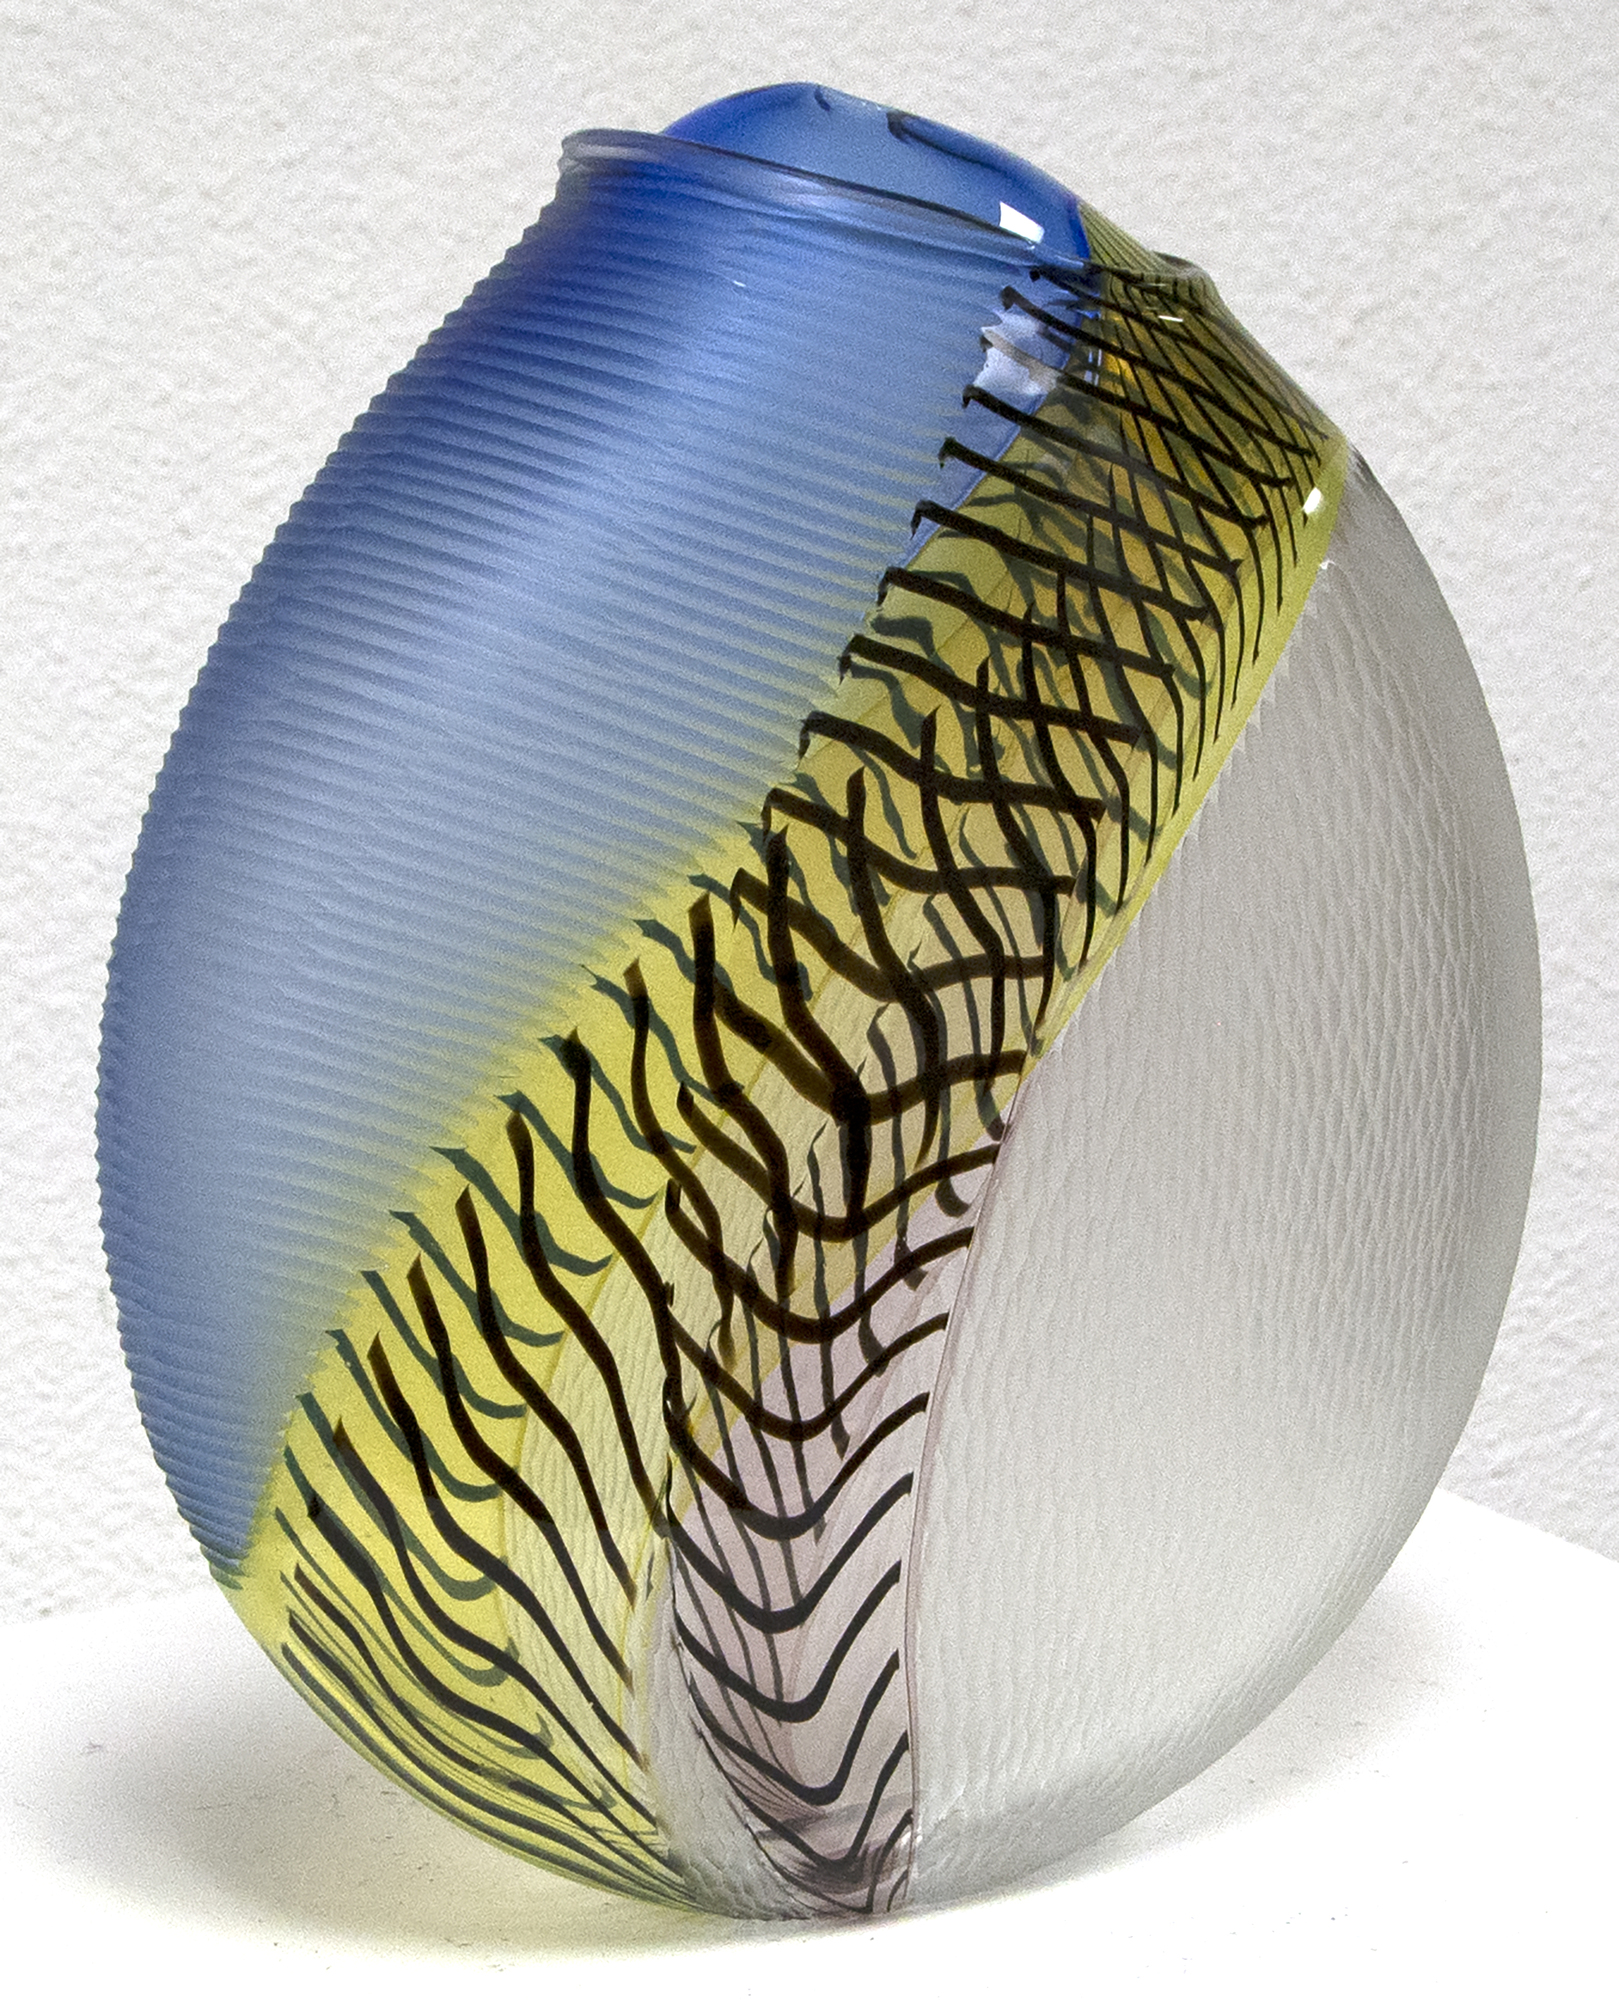 Hand blown glass with multiple incalmo of colored glass and filligrana. Switching the axel of the glass bubble and adjoining two glass bubbles with raticallo technique. Engraved partially on the surface with different patterns.
<br>
<br>Lino Tagliapietra, a native to Murano, is one of the world's preeminent glass artists.